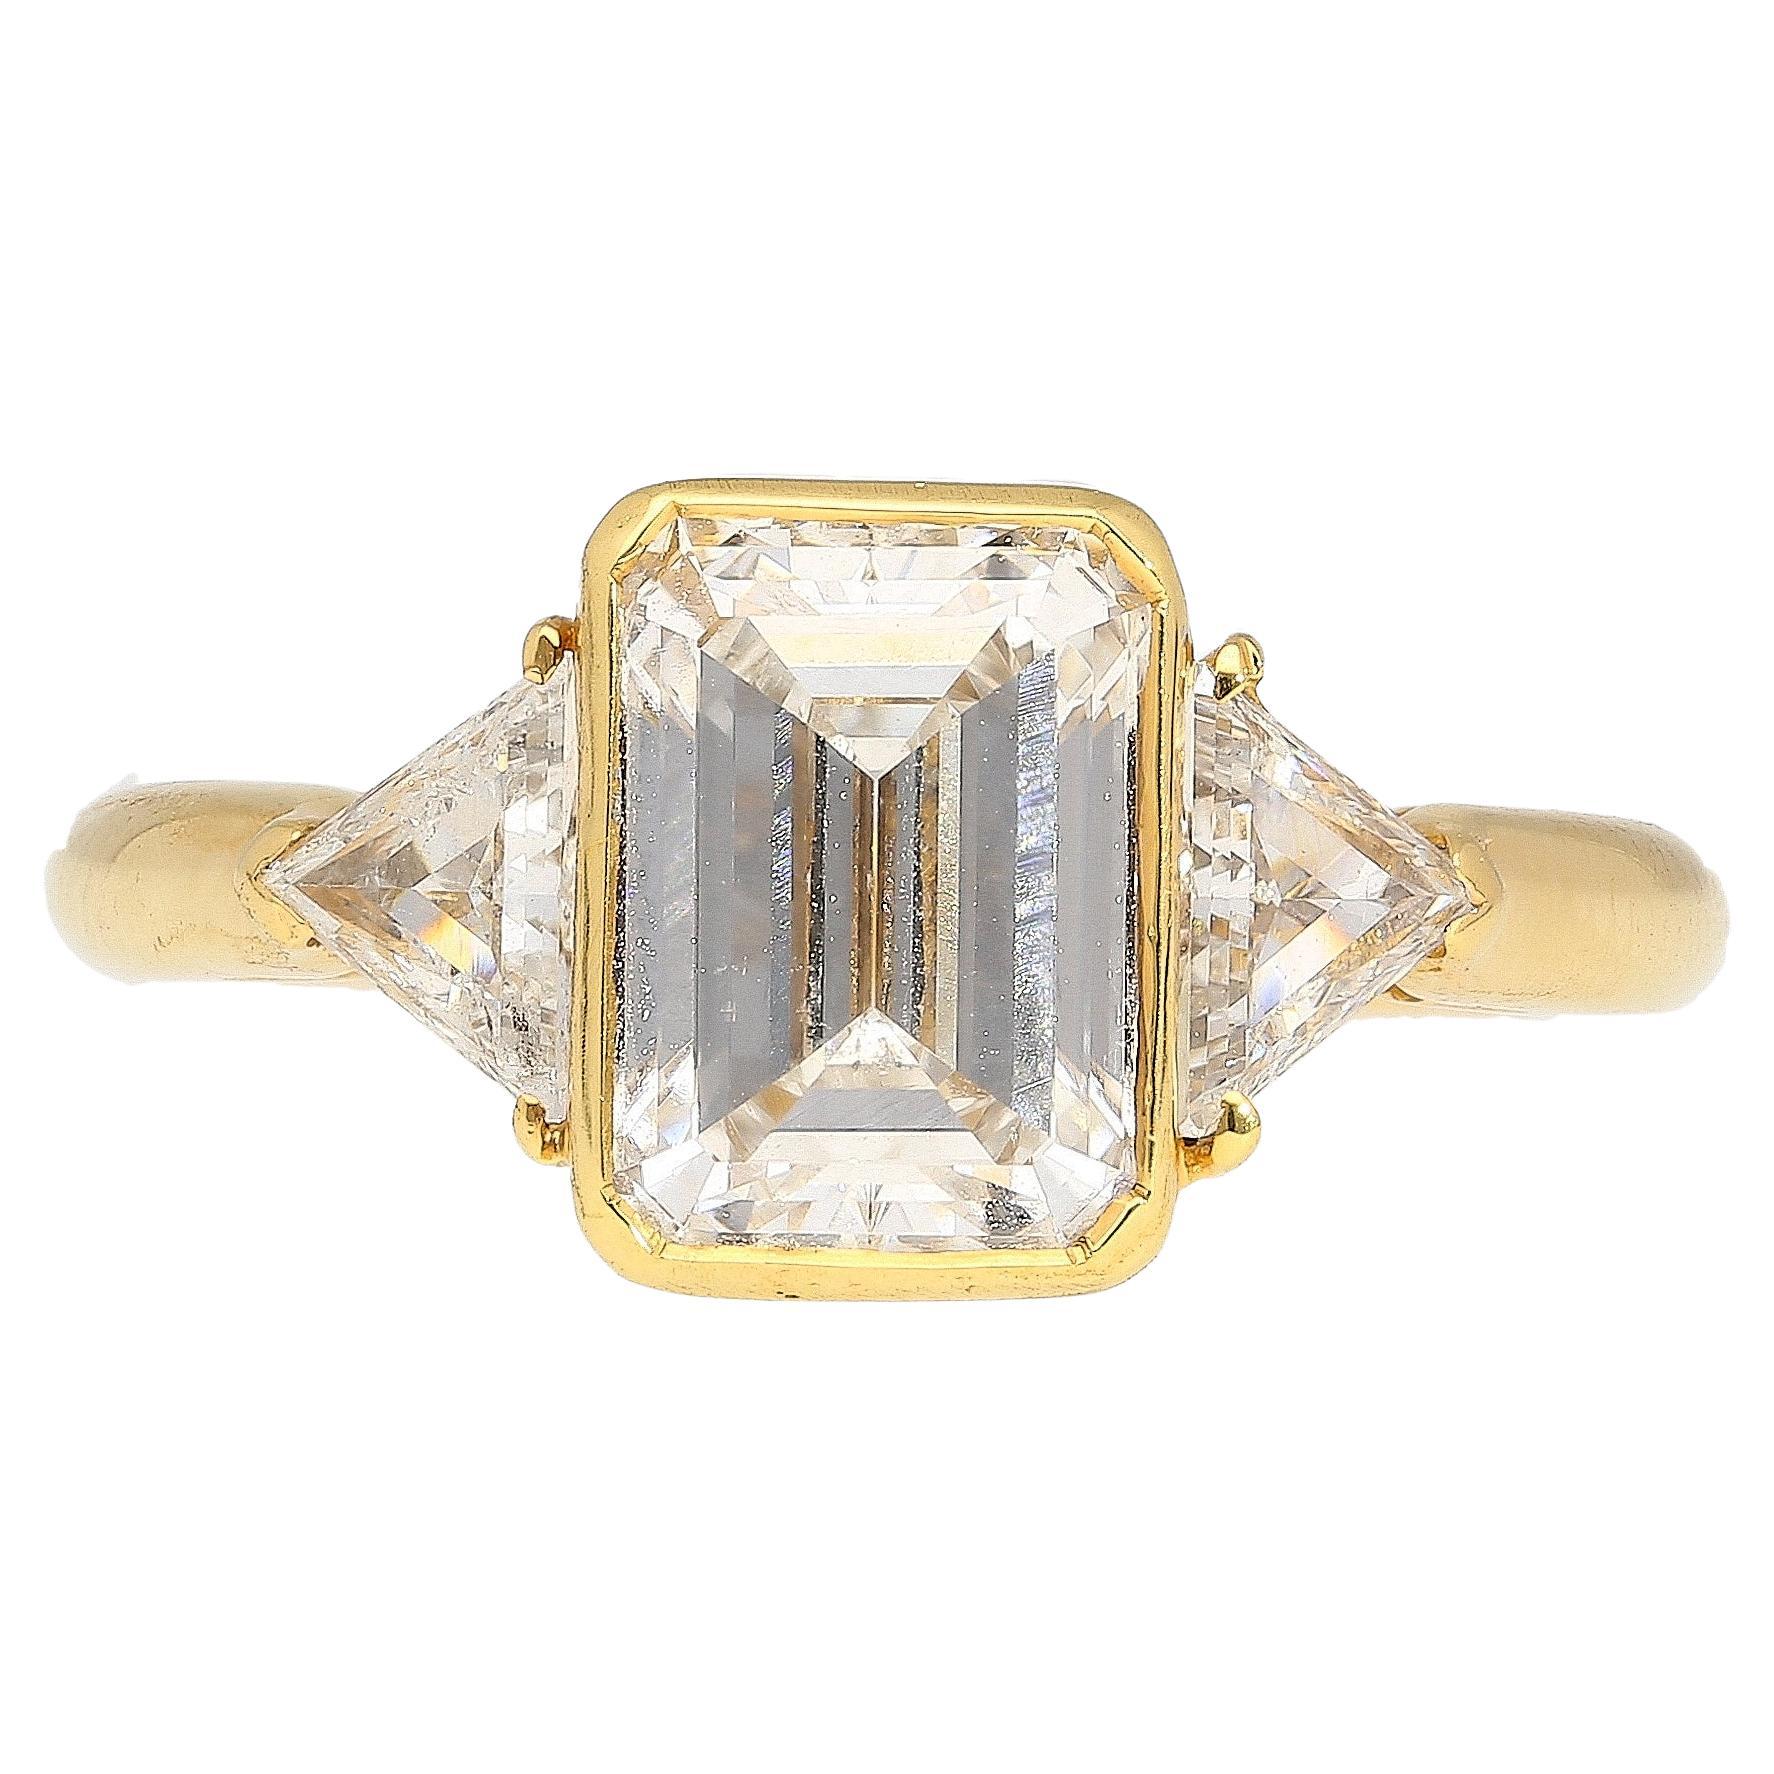 Boucheron signed three stone engagement ring, featuring an eye clean GIA certified 2.09 carat emerald cut E/SI1 diamond. Flanked by two trillion cut diamond side stones, all set in smooth 18K Yellow Gold.

The stone's SI1 clarity is unique in that